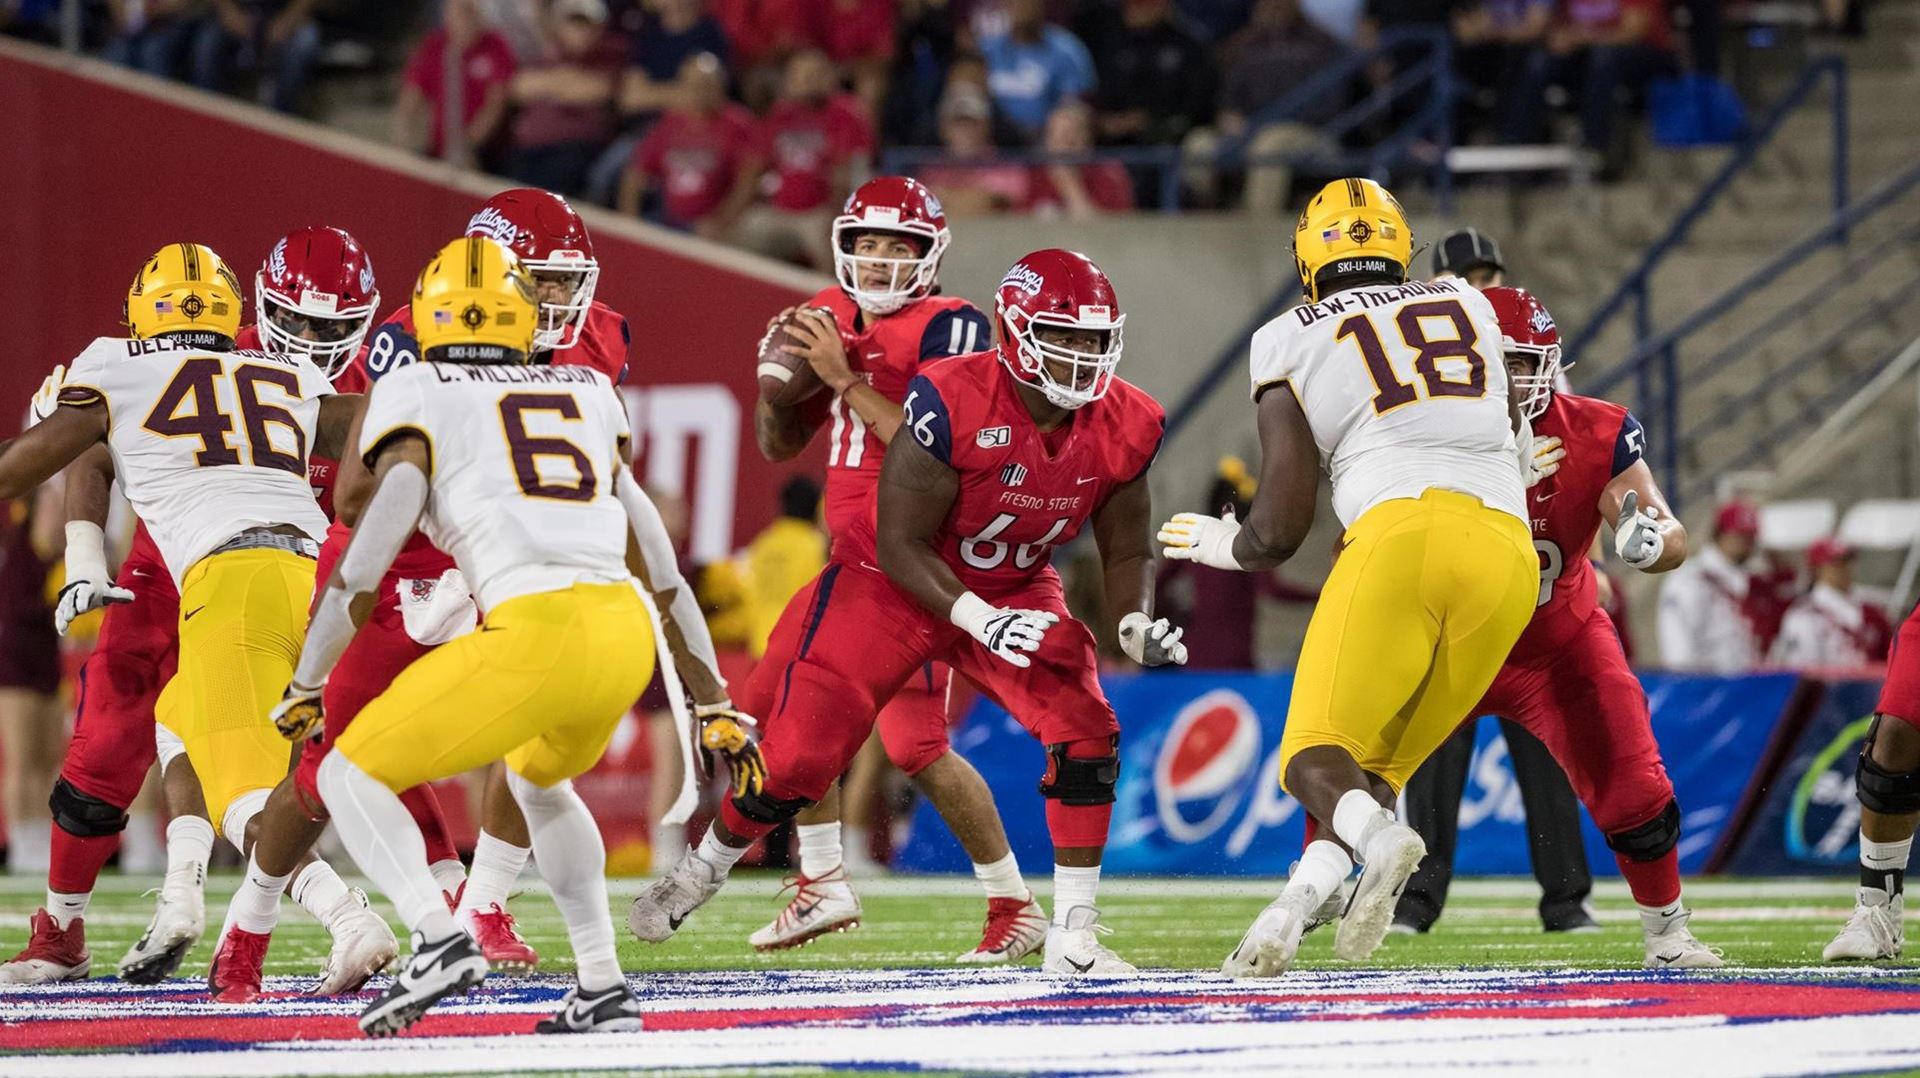 From SoCal to the East Coast, Fresno State sets football schedule